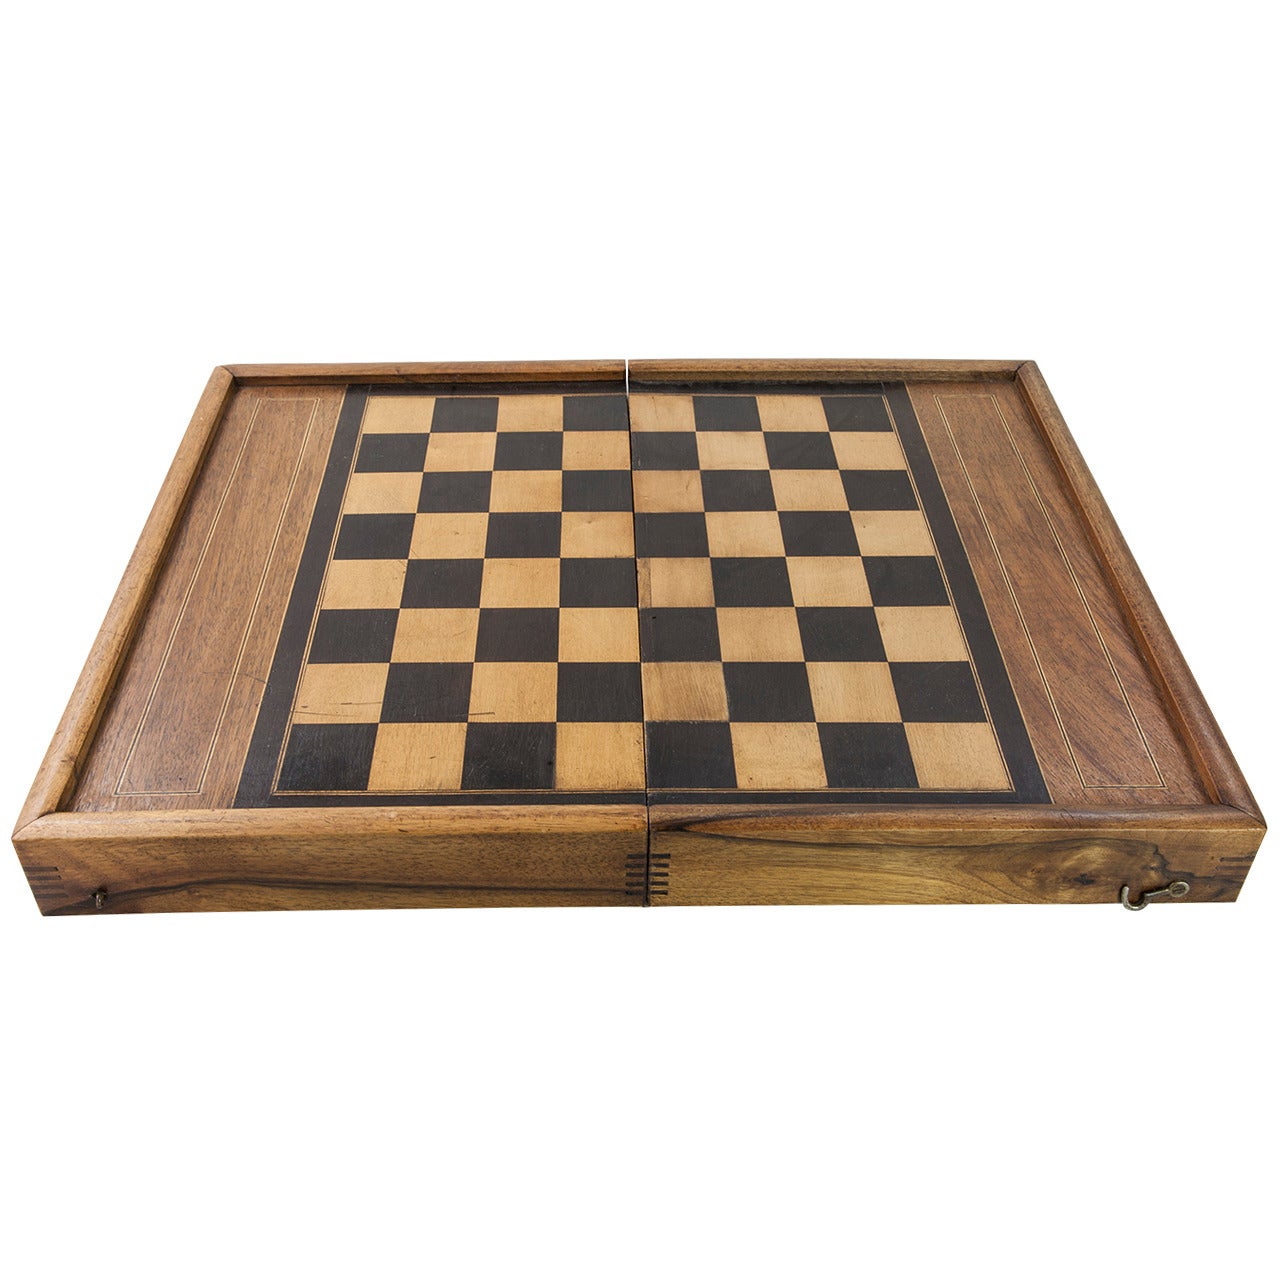 Parquetry Wooden Game Board Box for Checkers Chess Backgammon